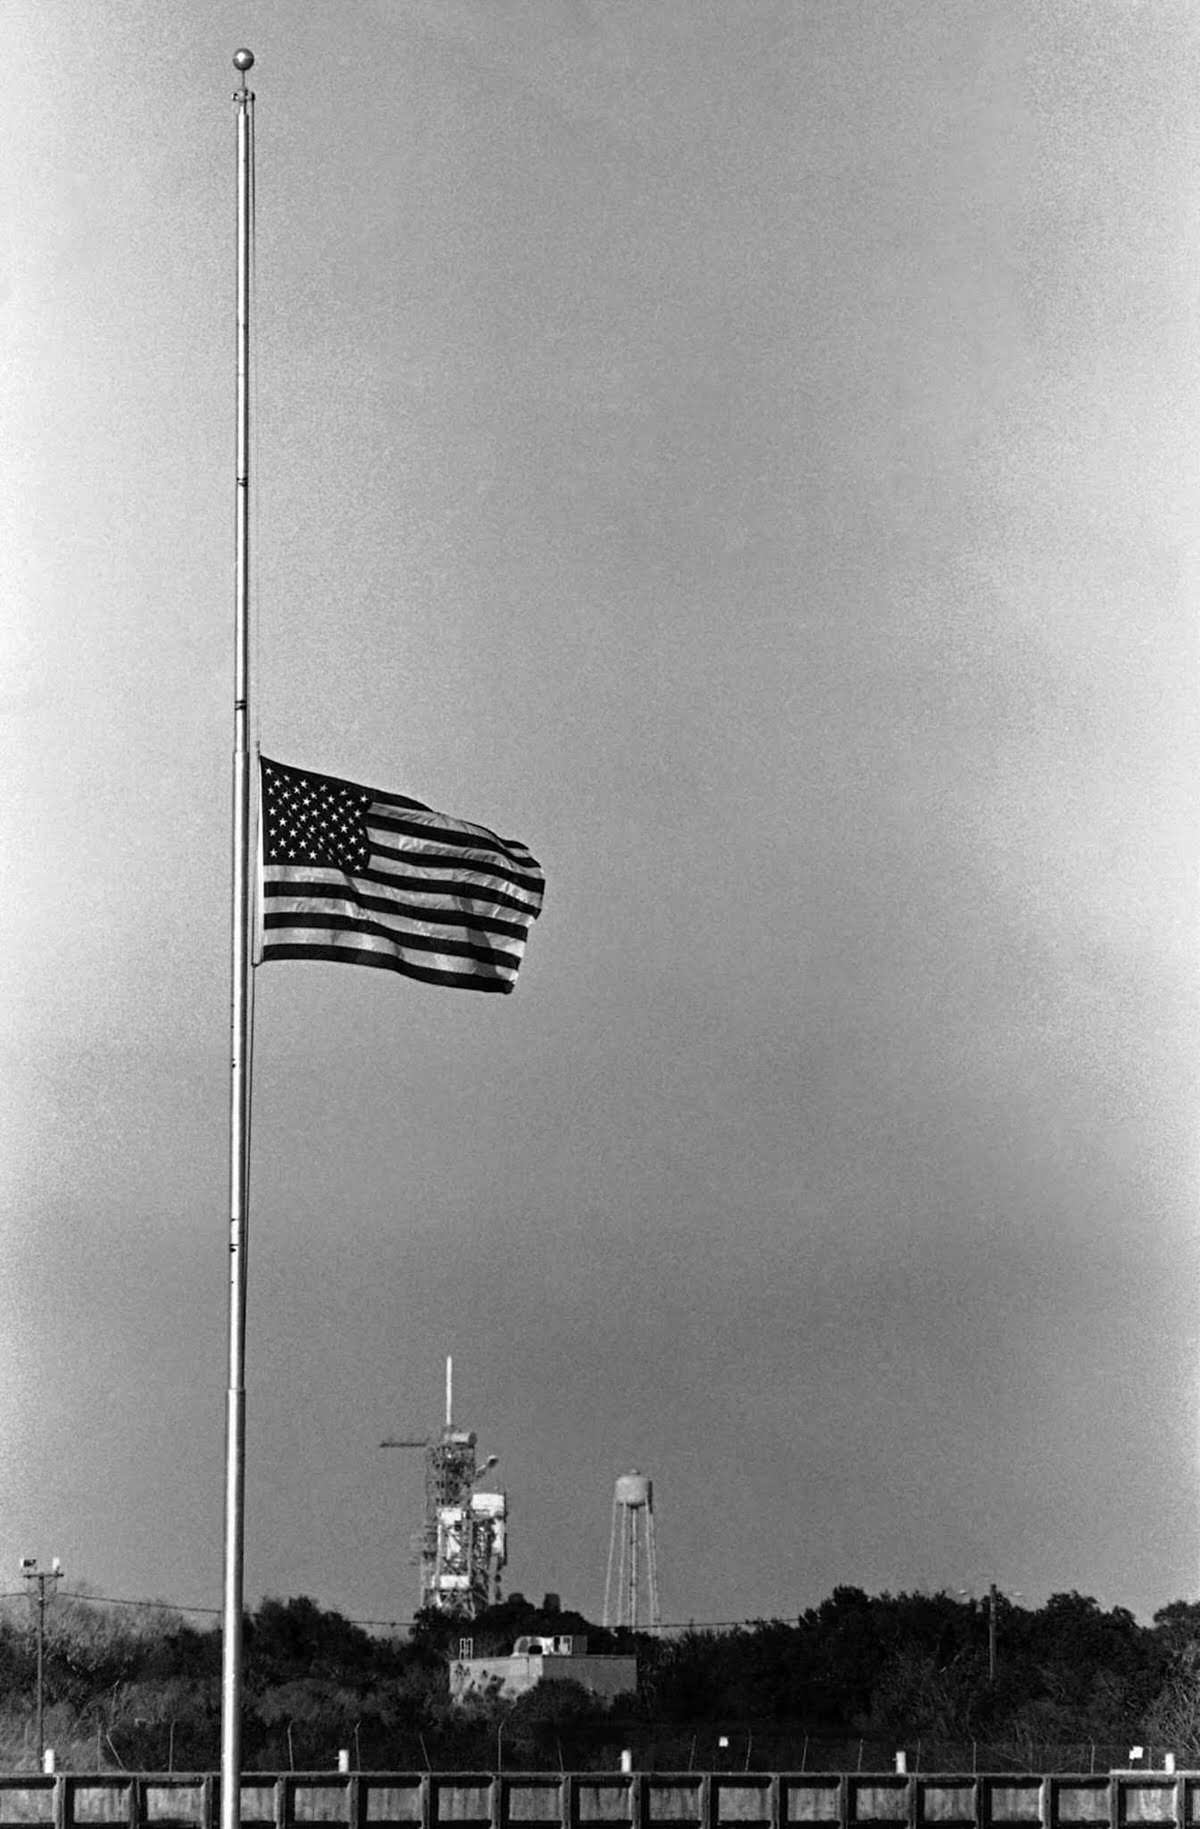 A flag flies at half-mast at Kennedy Space Center after the explosion.